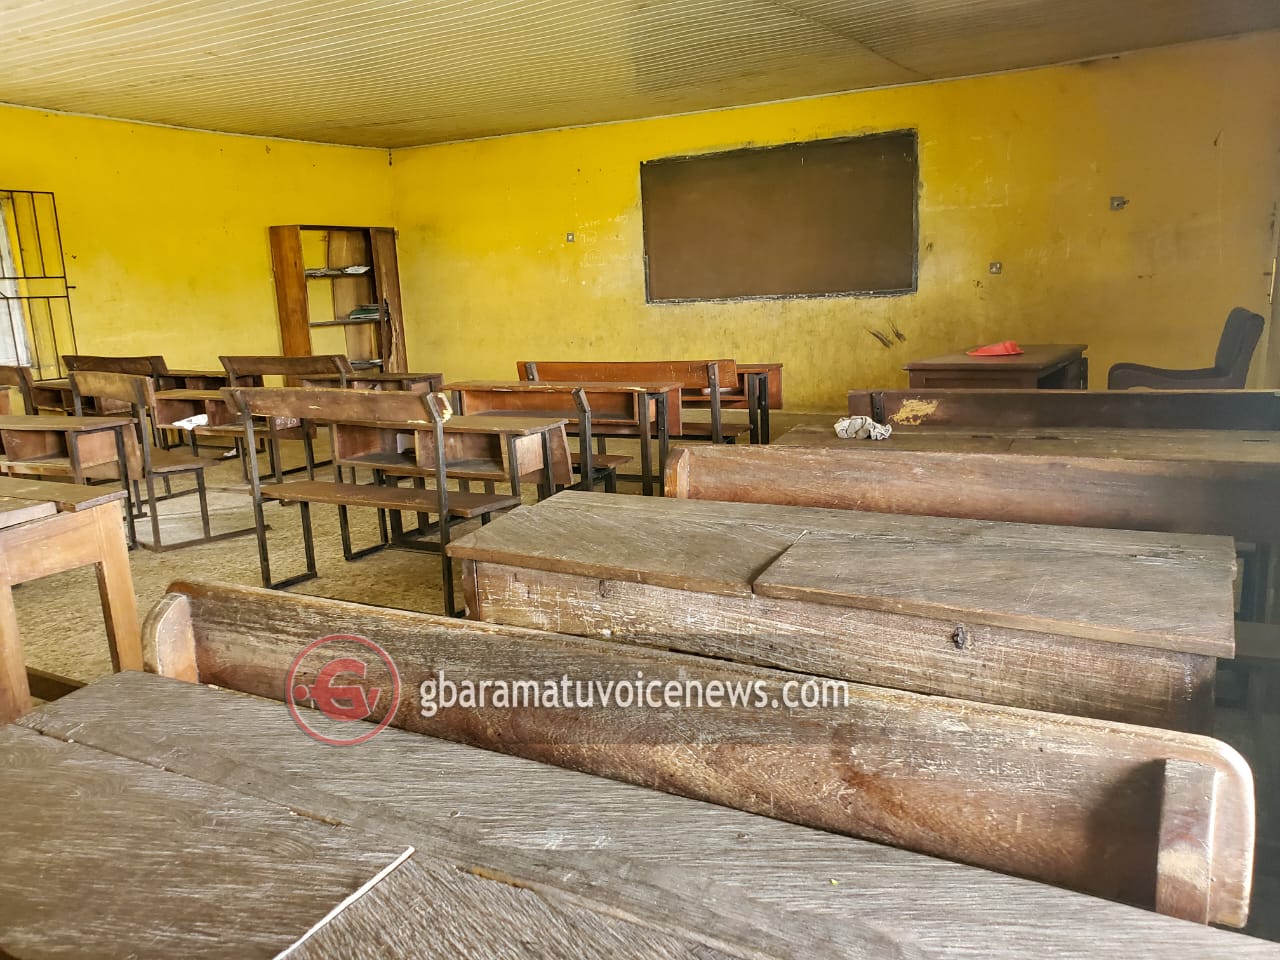 Infrastructural decay under Governor Okowa’s leadership continues: The current state of Kokodiagbene Primary School